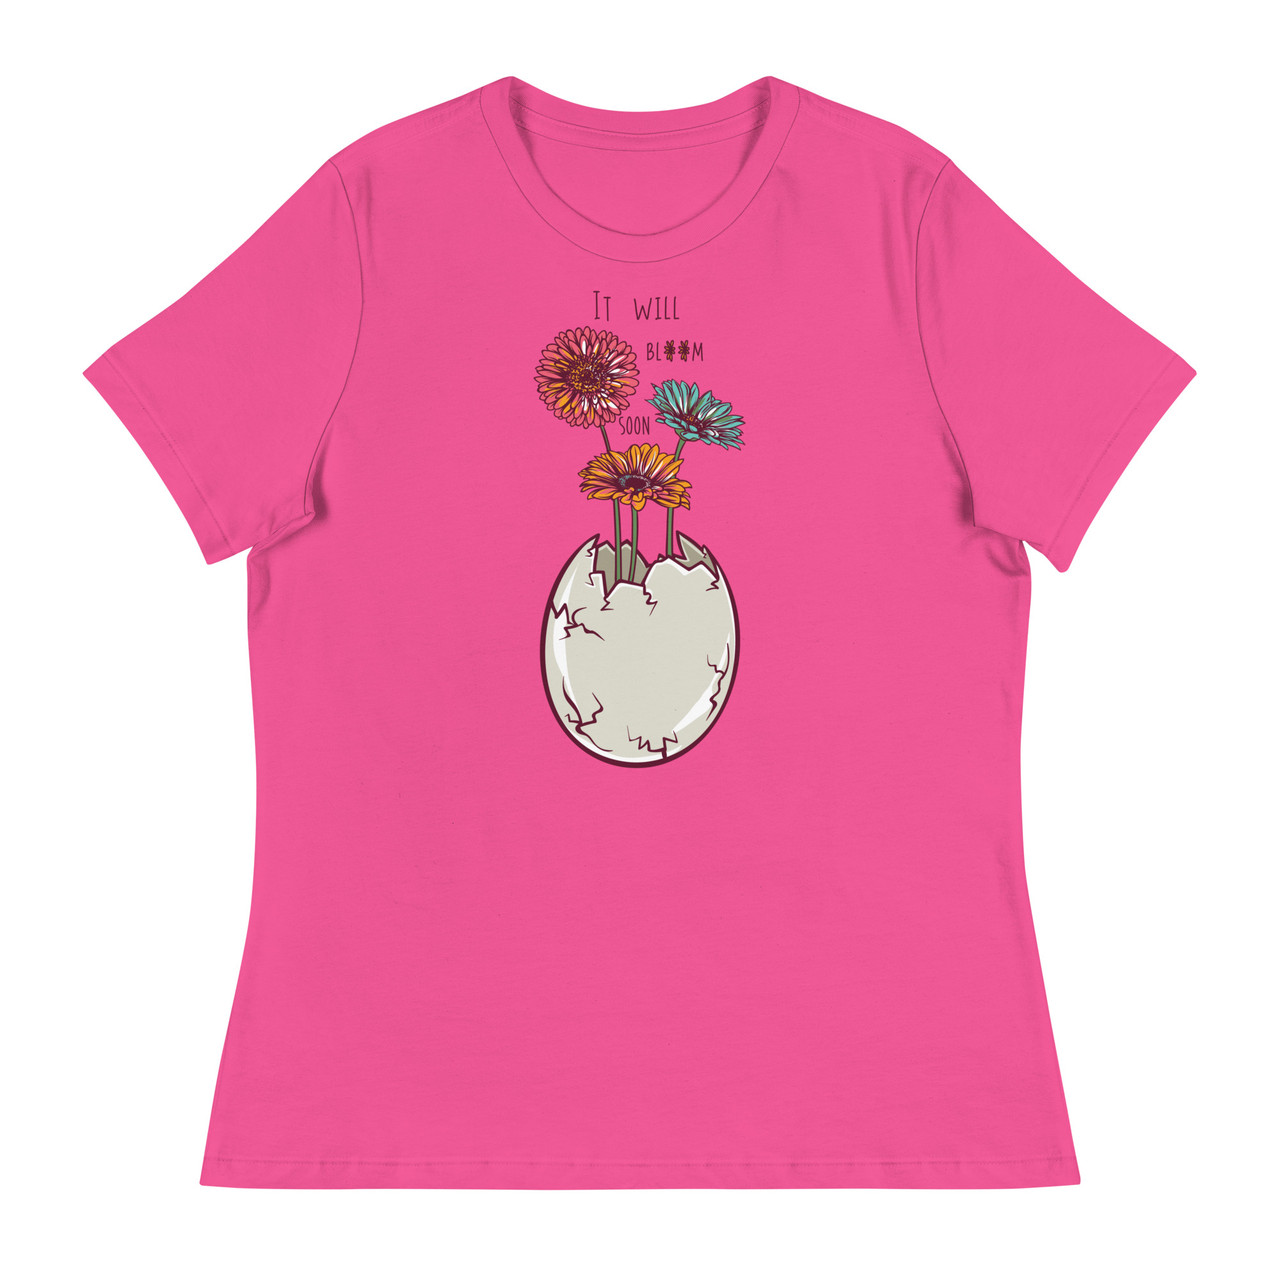 I Will Bloom Soon Women's Relaxed T-Shirt - Bella + Canvas 6400 